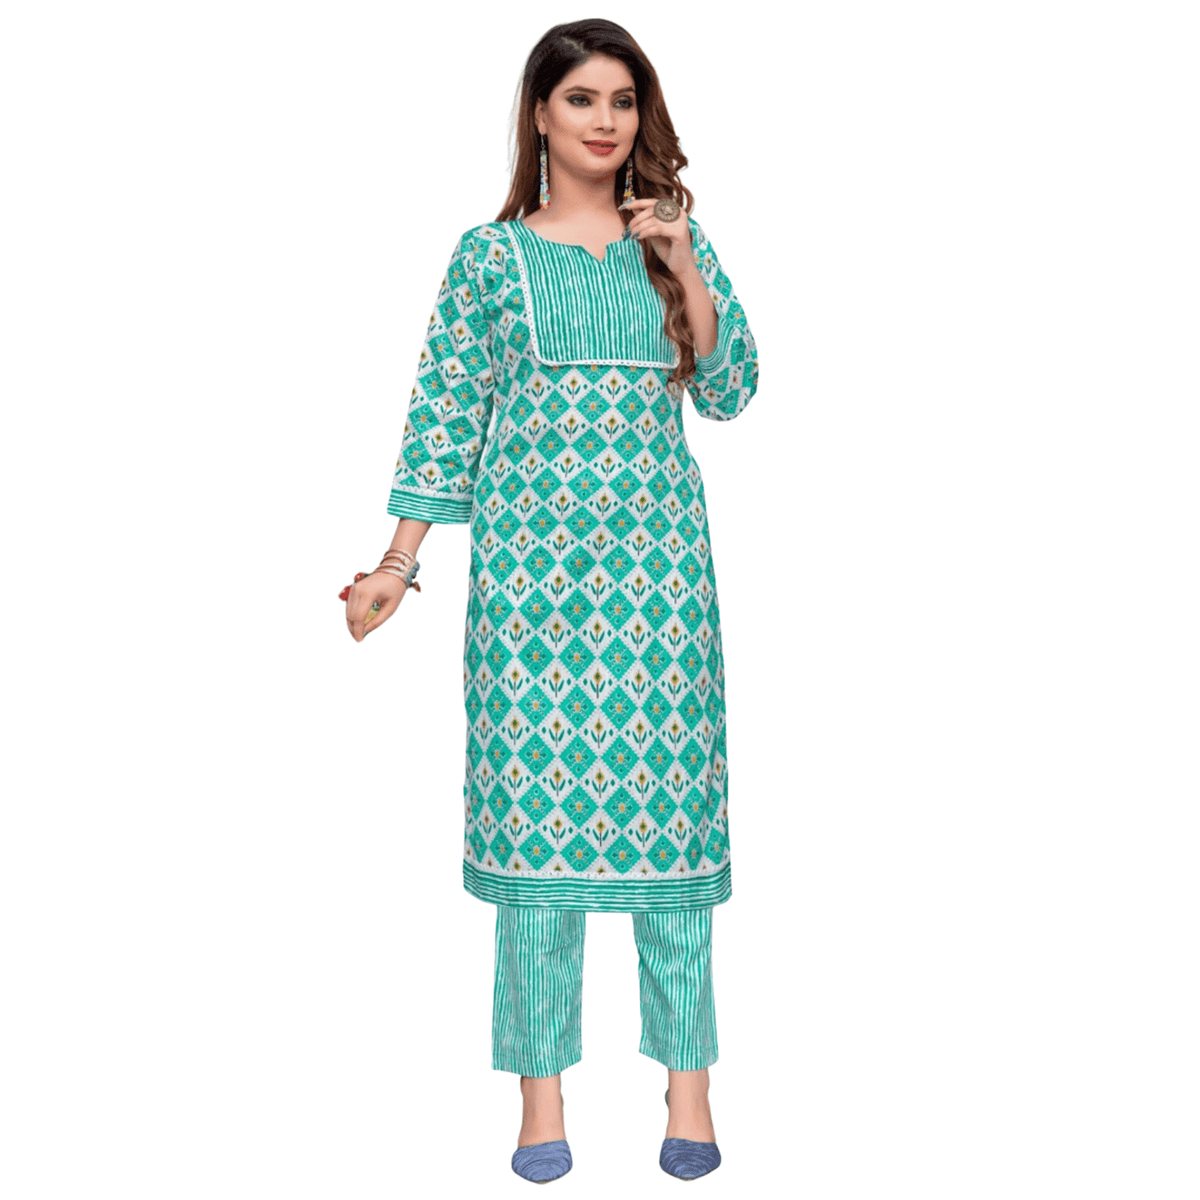 Shop Online for Green Cotton Kurti with Pant for women - Bavis Clothing: Low Price